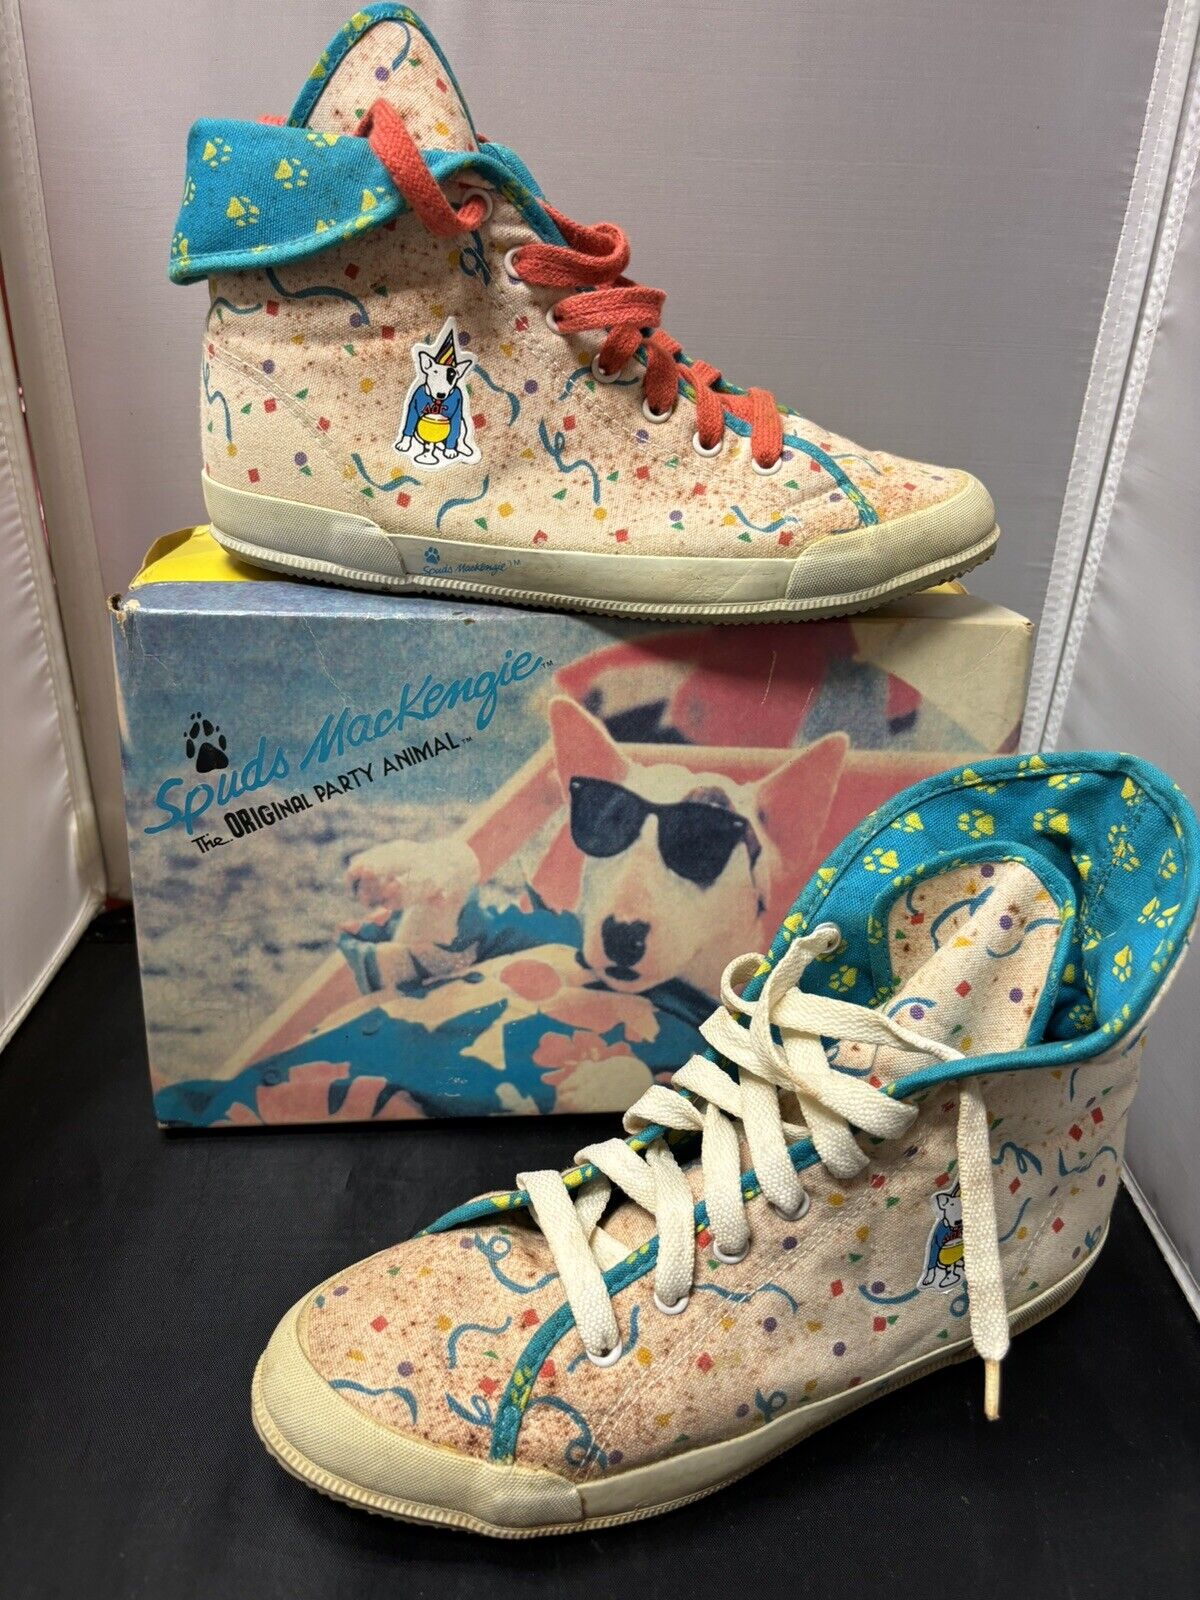 Awesome Vintage 1986 Spuds Mackenzie High Top Shoes W/ Box Size 7M